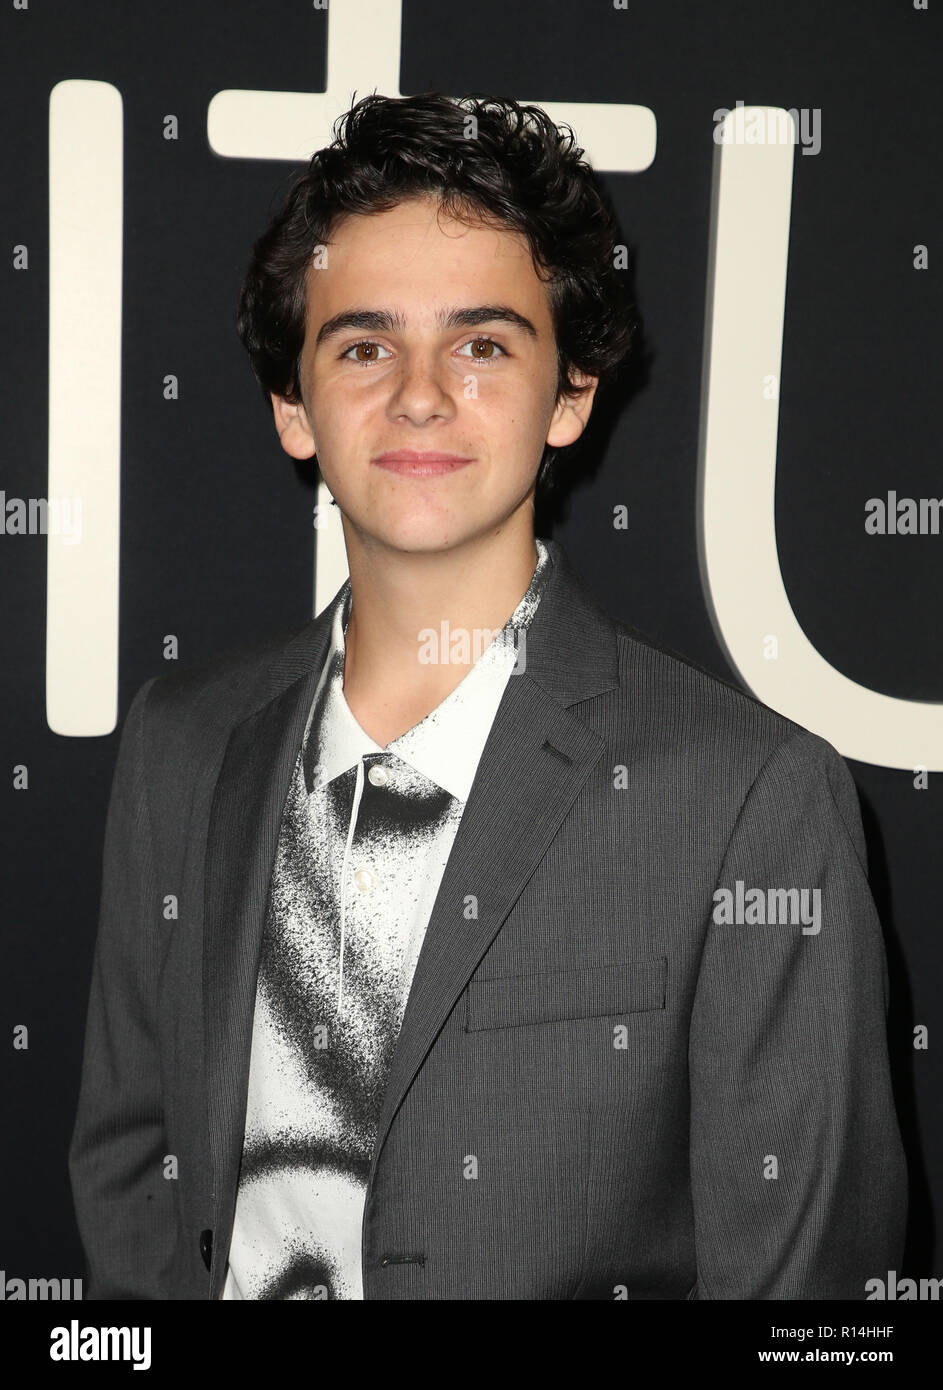 Amazon Studios Los Angeles Premiere Of "Beautiful Boy" Featuring: Jack  Dylan Grazer Where: Beverly Hills, California, United States When: 08 Oct  2018 Credit: FayesVision/WENN.com Stock Photo - Alamy